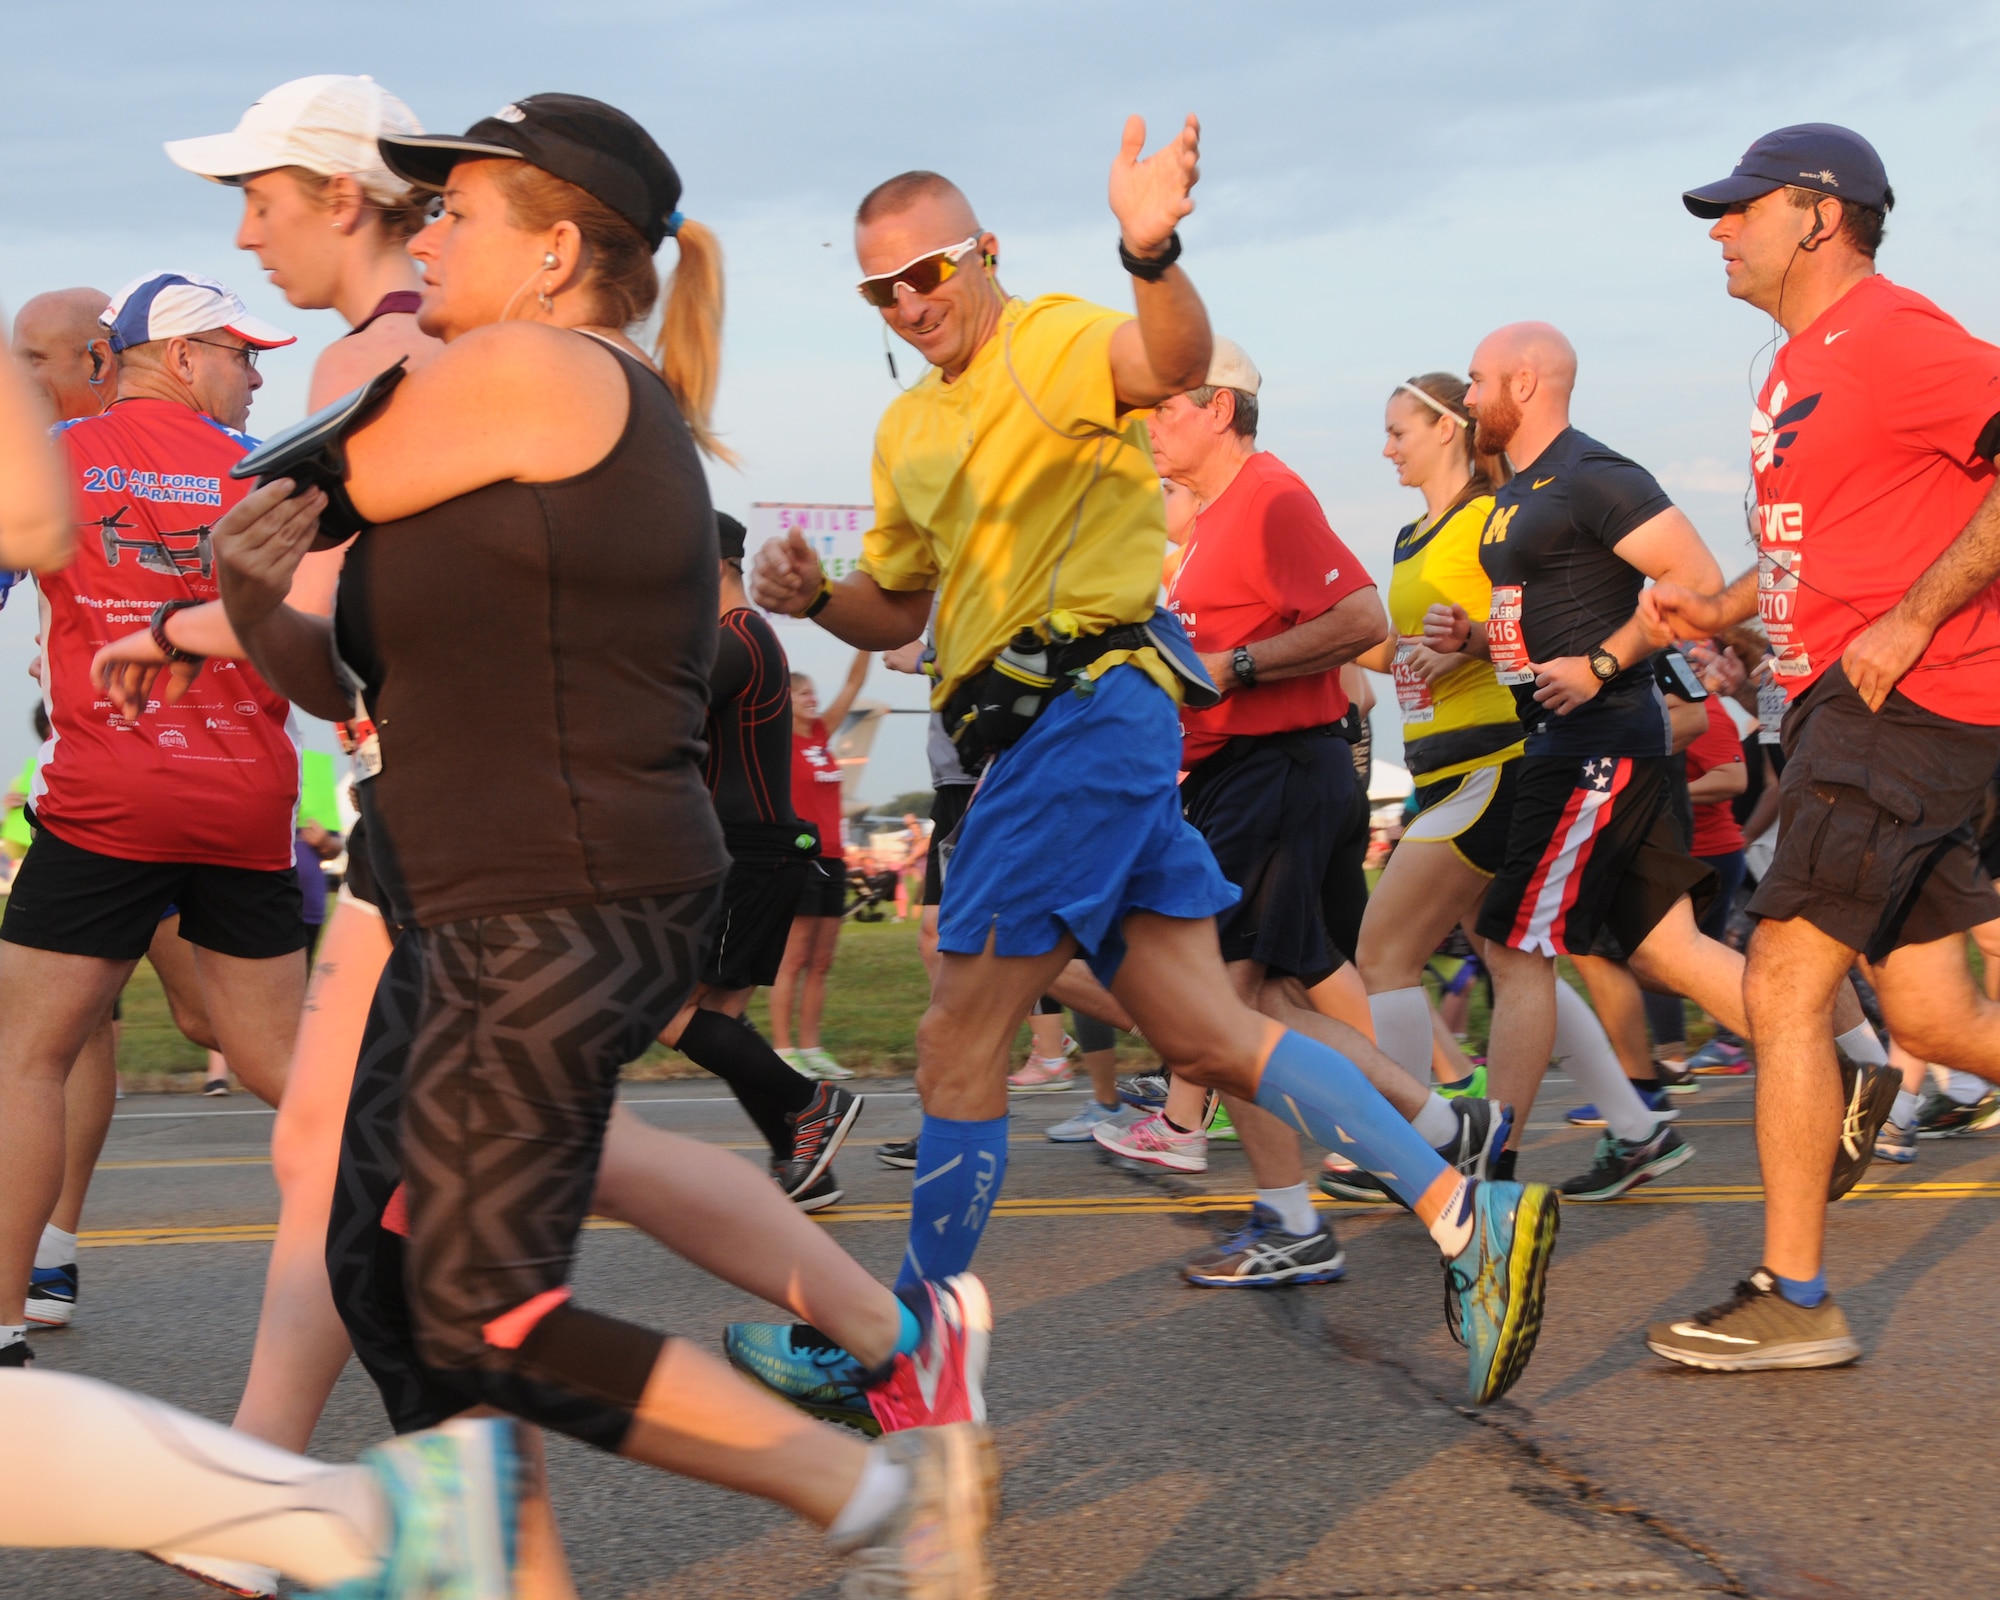 Maj. Michael Loy, center, Montana Air National Guard member,  waves from the start of the 20th anniversary U. S. Air Force Marathon at Wright-Patterson Air Force Base, Ohio, Sept. 17, 2016. Loy coordinated a team from the Montana National Guard and Malmstrom Air Force Base to participate in the event. (U.S. Air National Guard photo/Staff Sgt. Lindsey Soulsby)